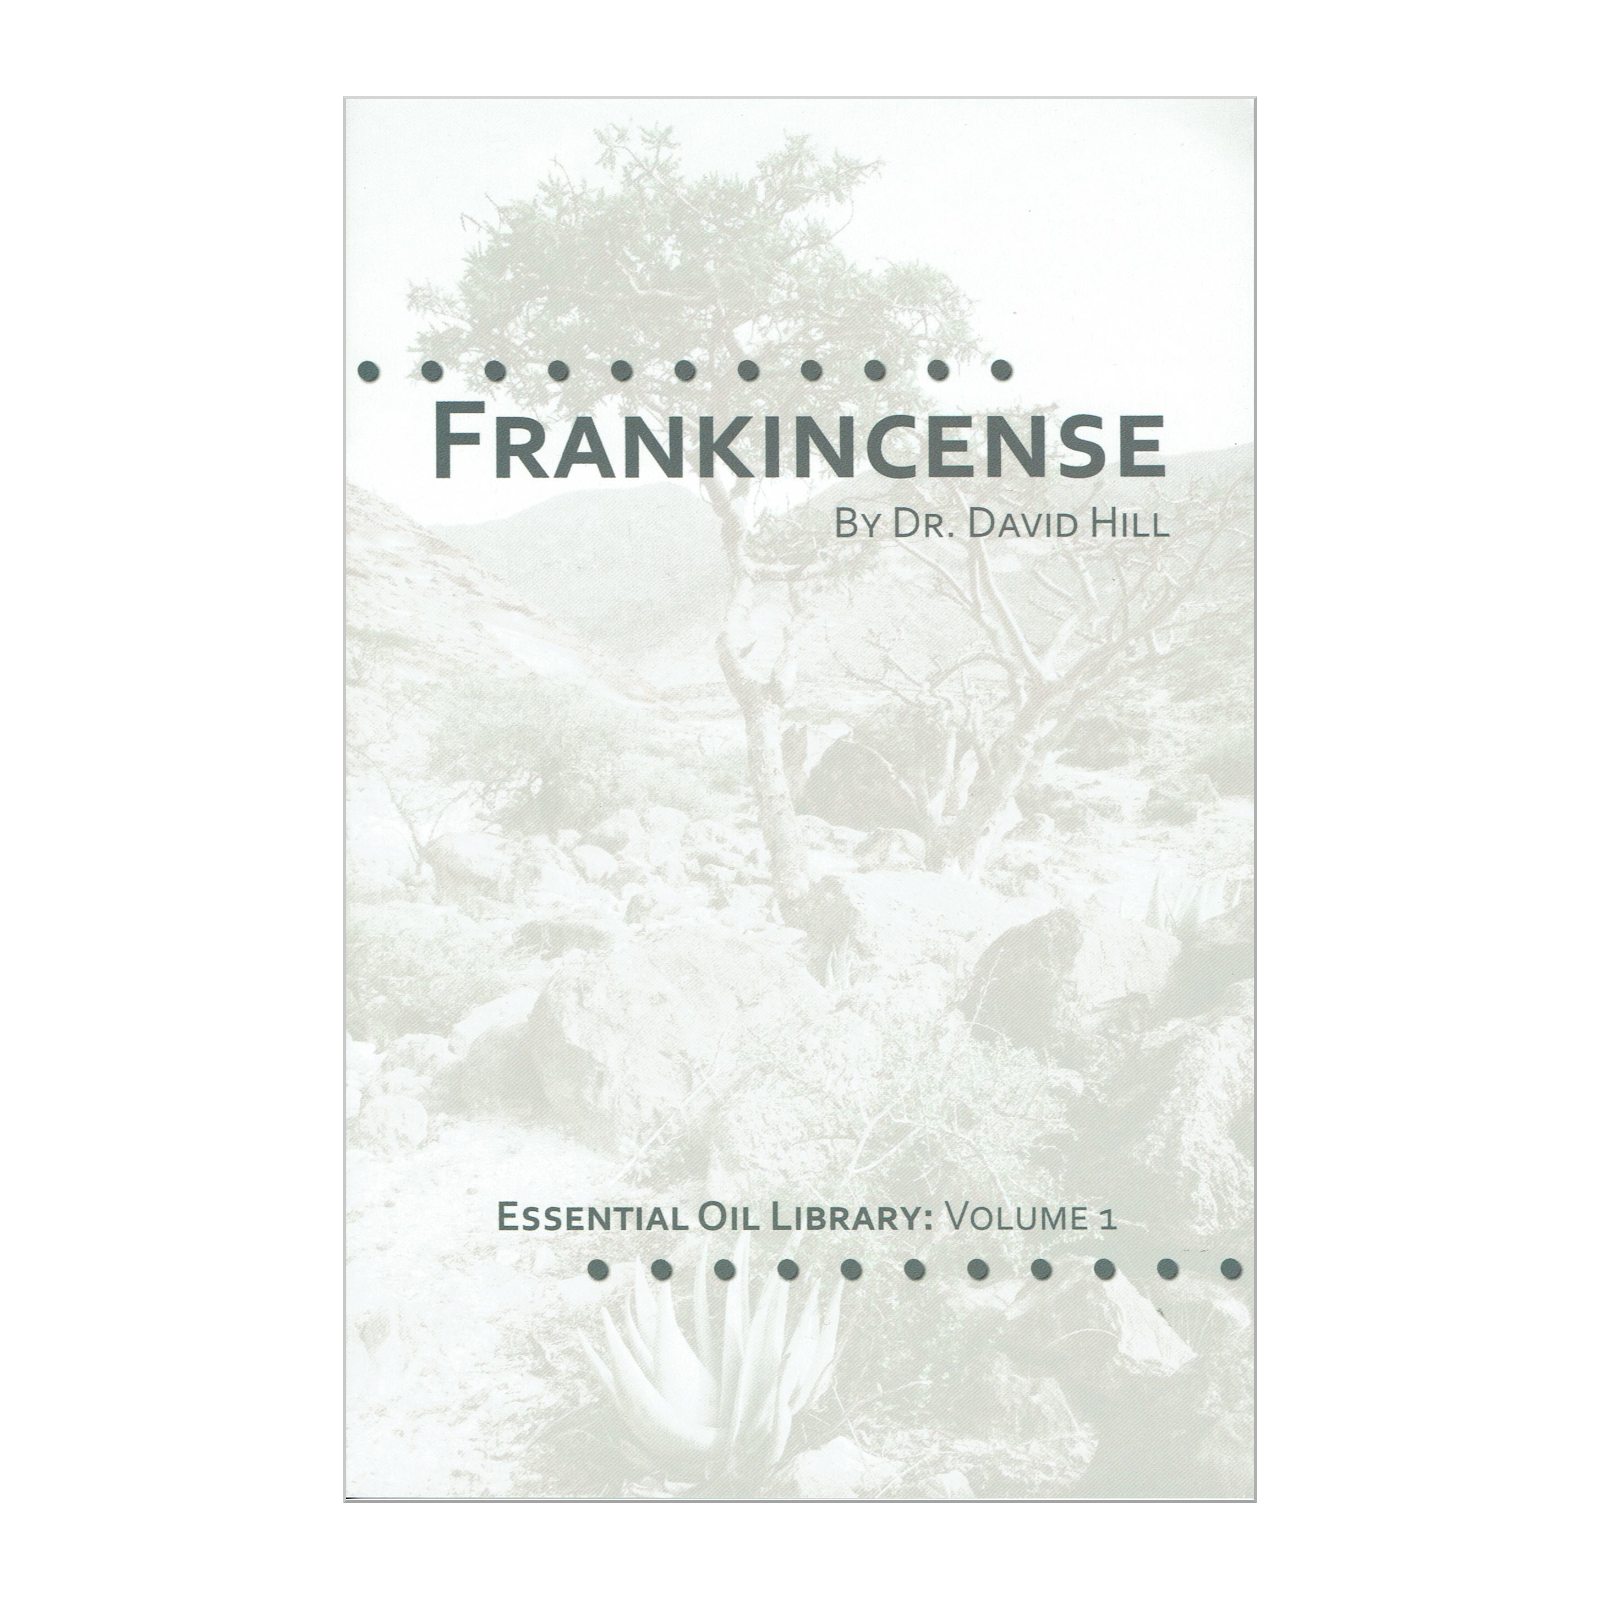 Frankincense, by dr. David Hill